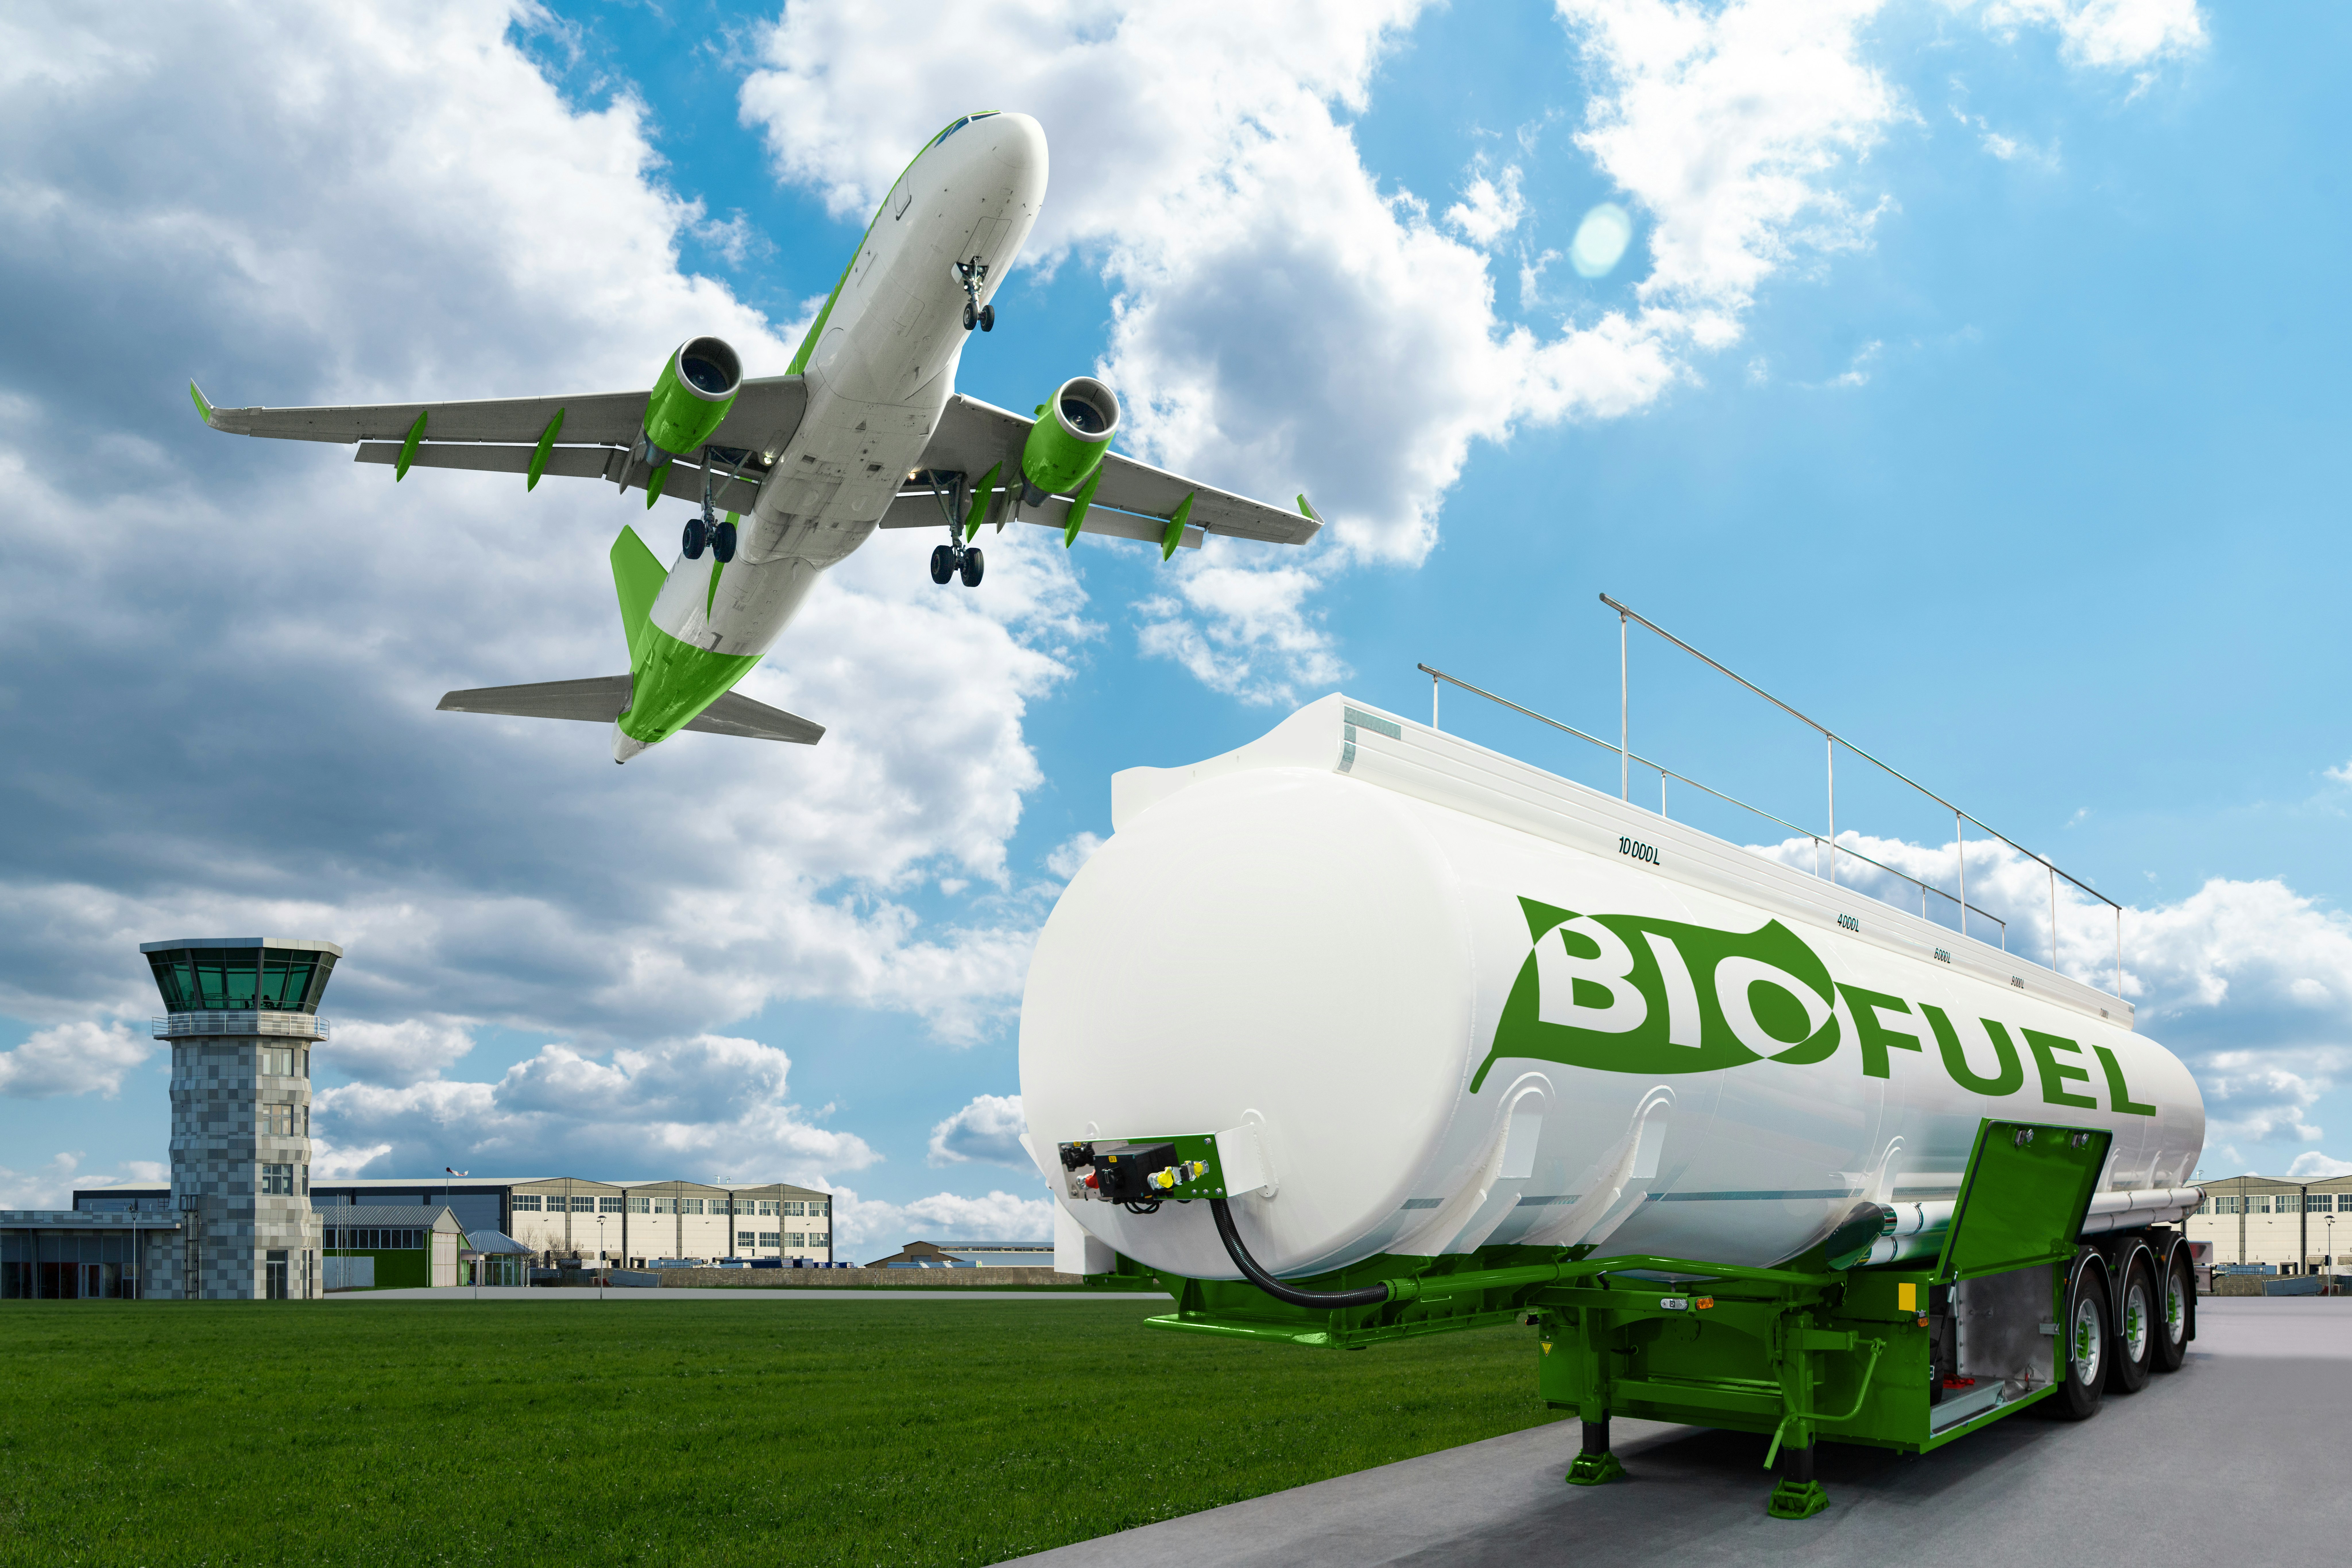 Airplane Flying above Biofuel Tank at an Airport